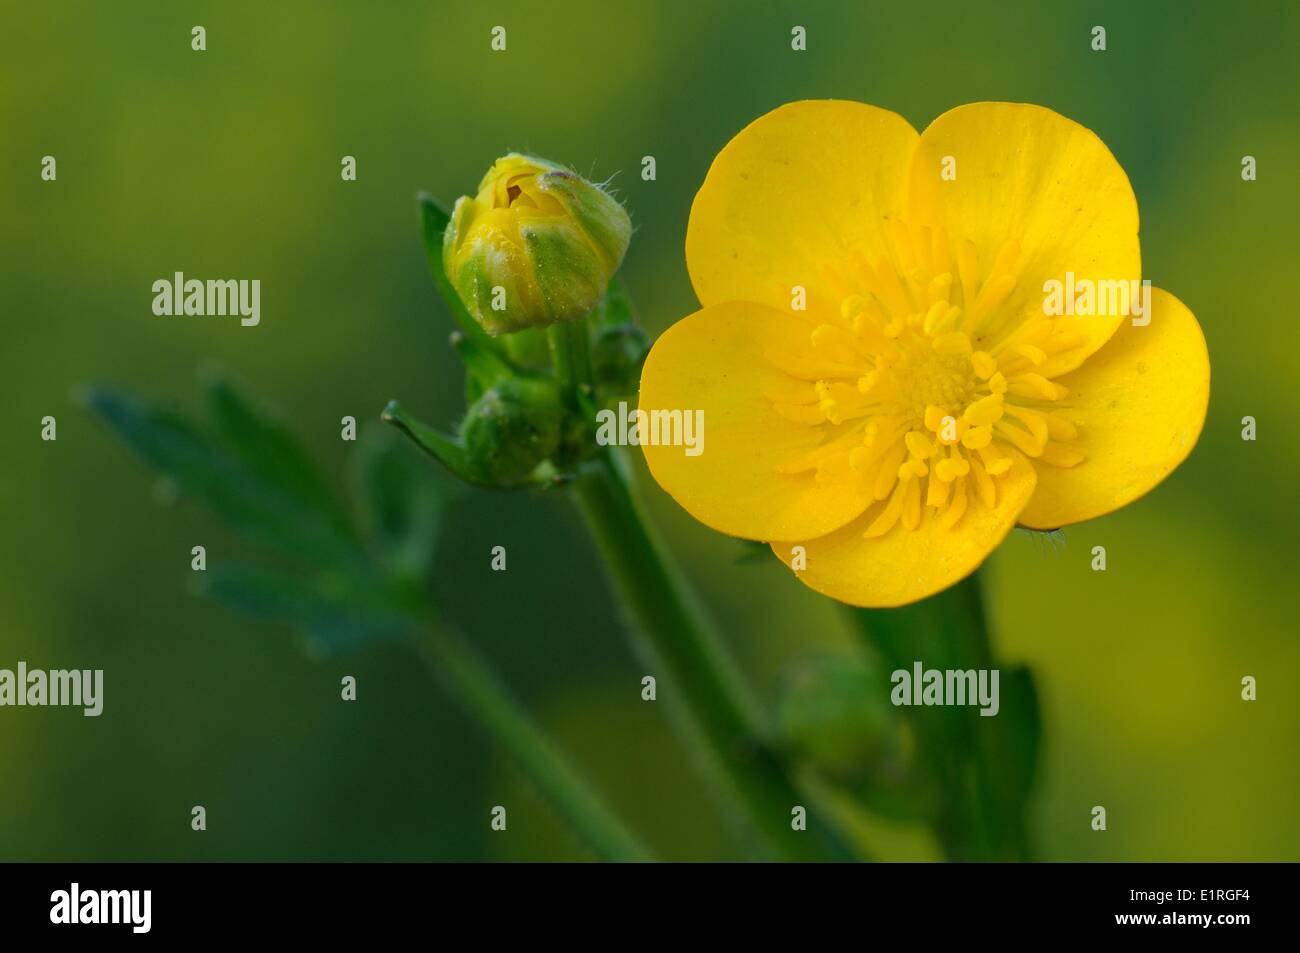 Creeping Buttercup flower in close-up Stock Photo